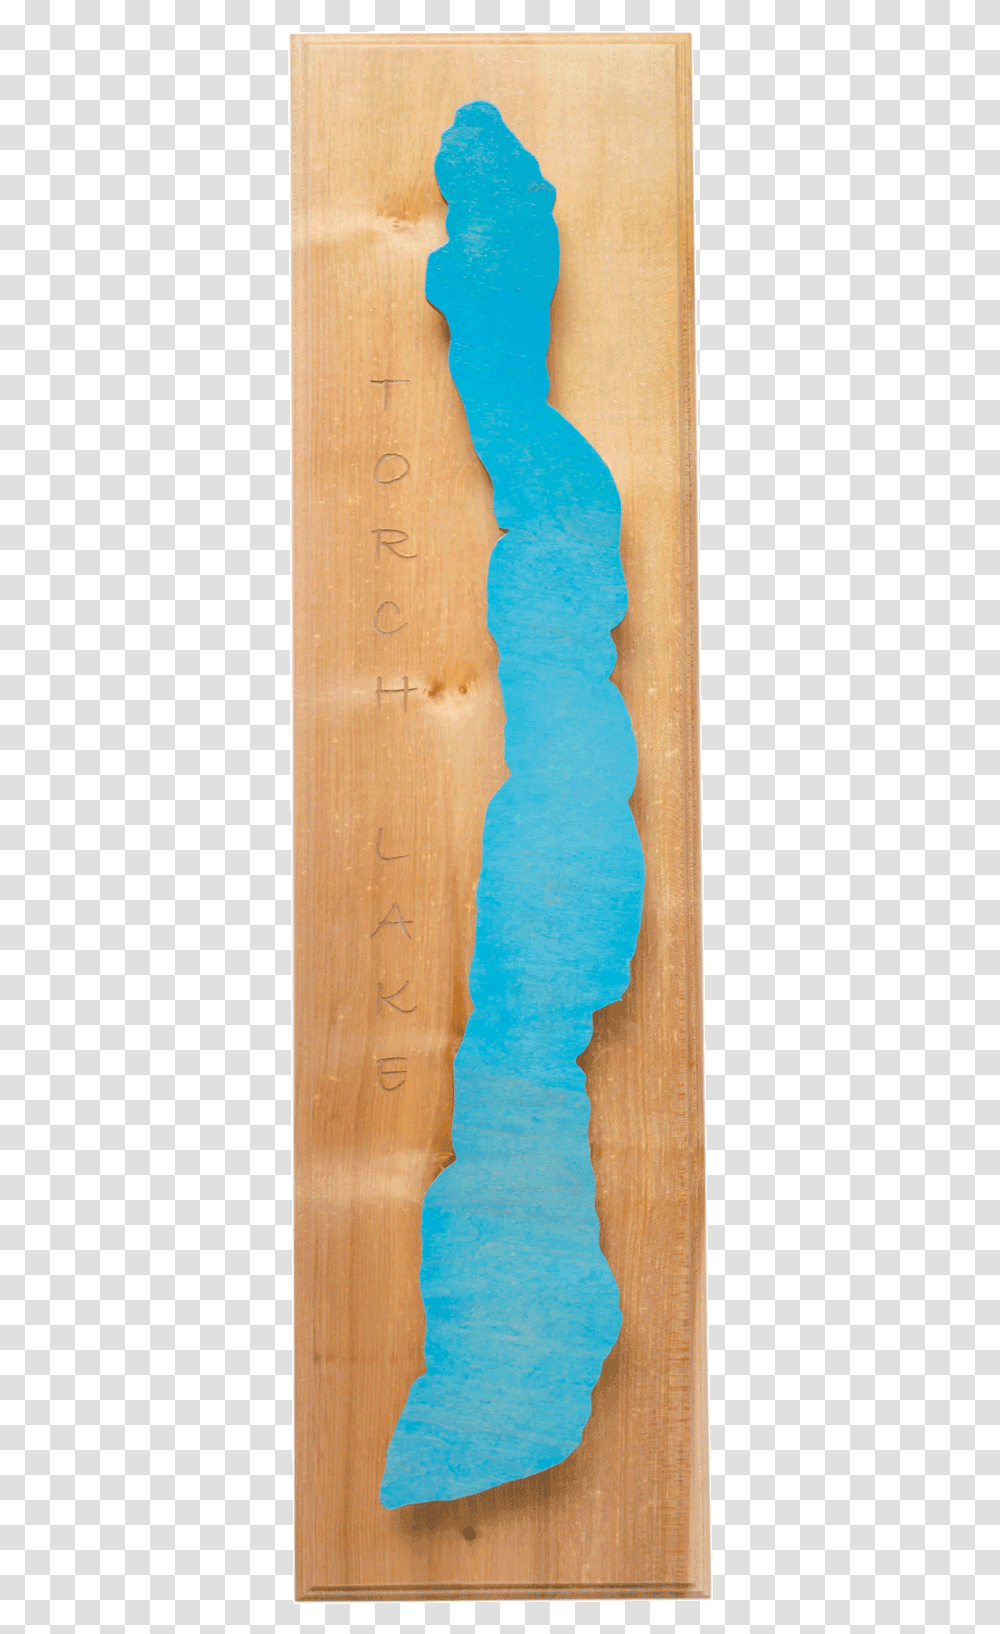 Torch Lake 3d Outline Outline Of Torch Lake Michigan, Wood, Plywood Transparent Png